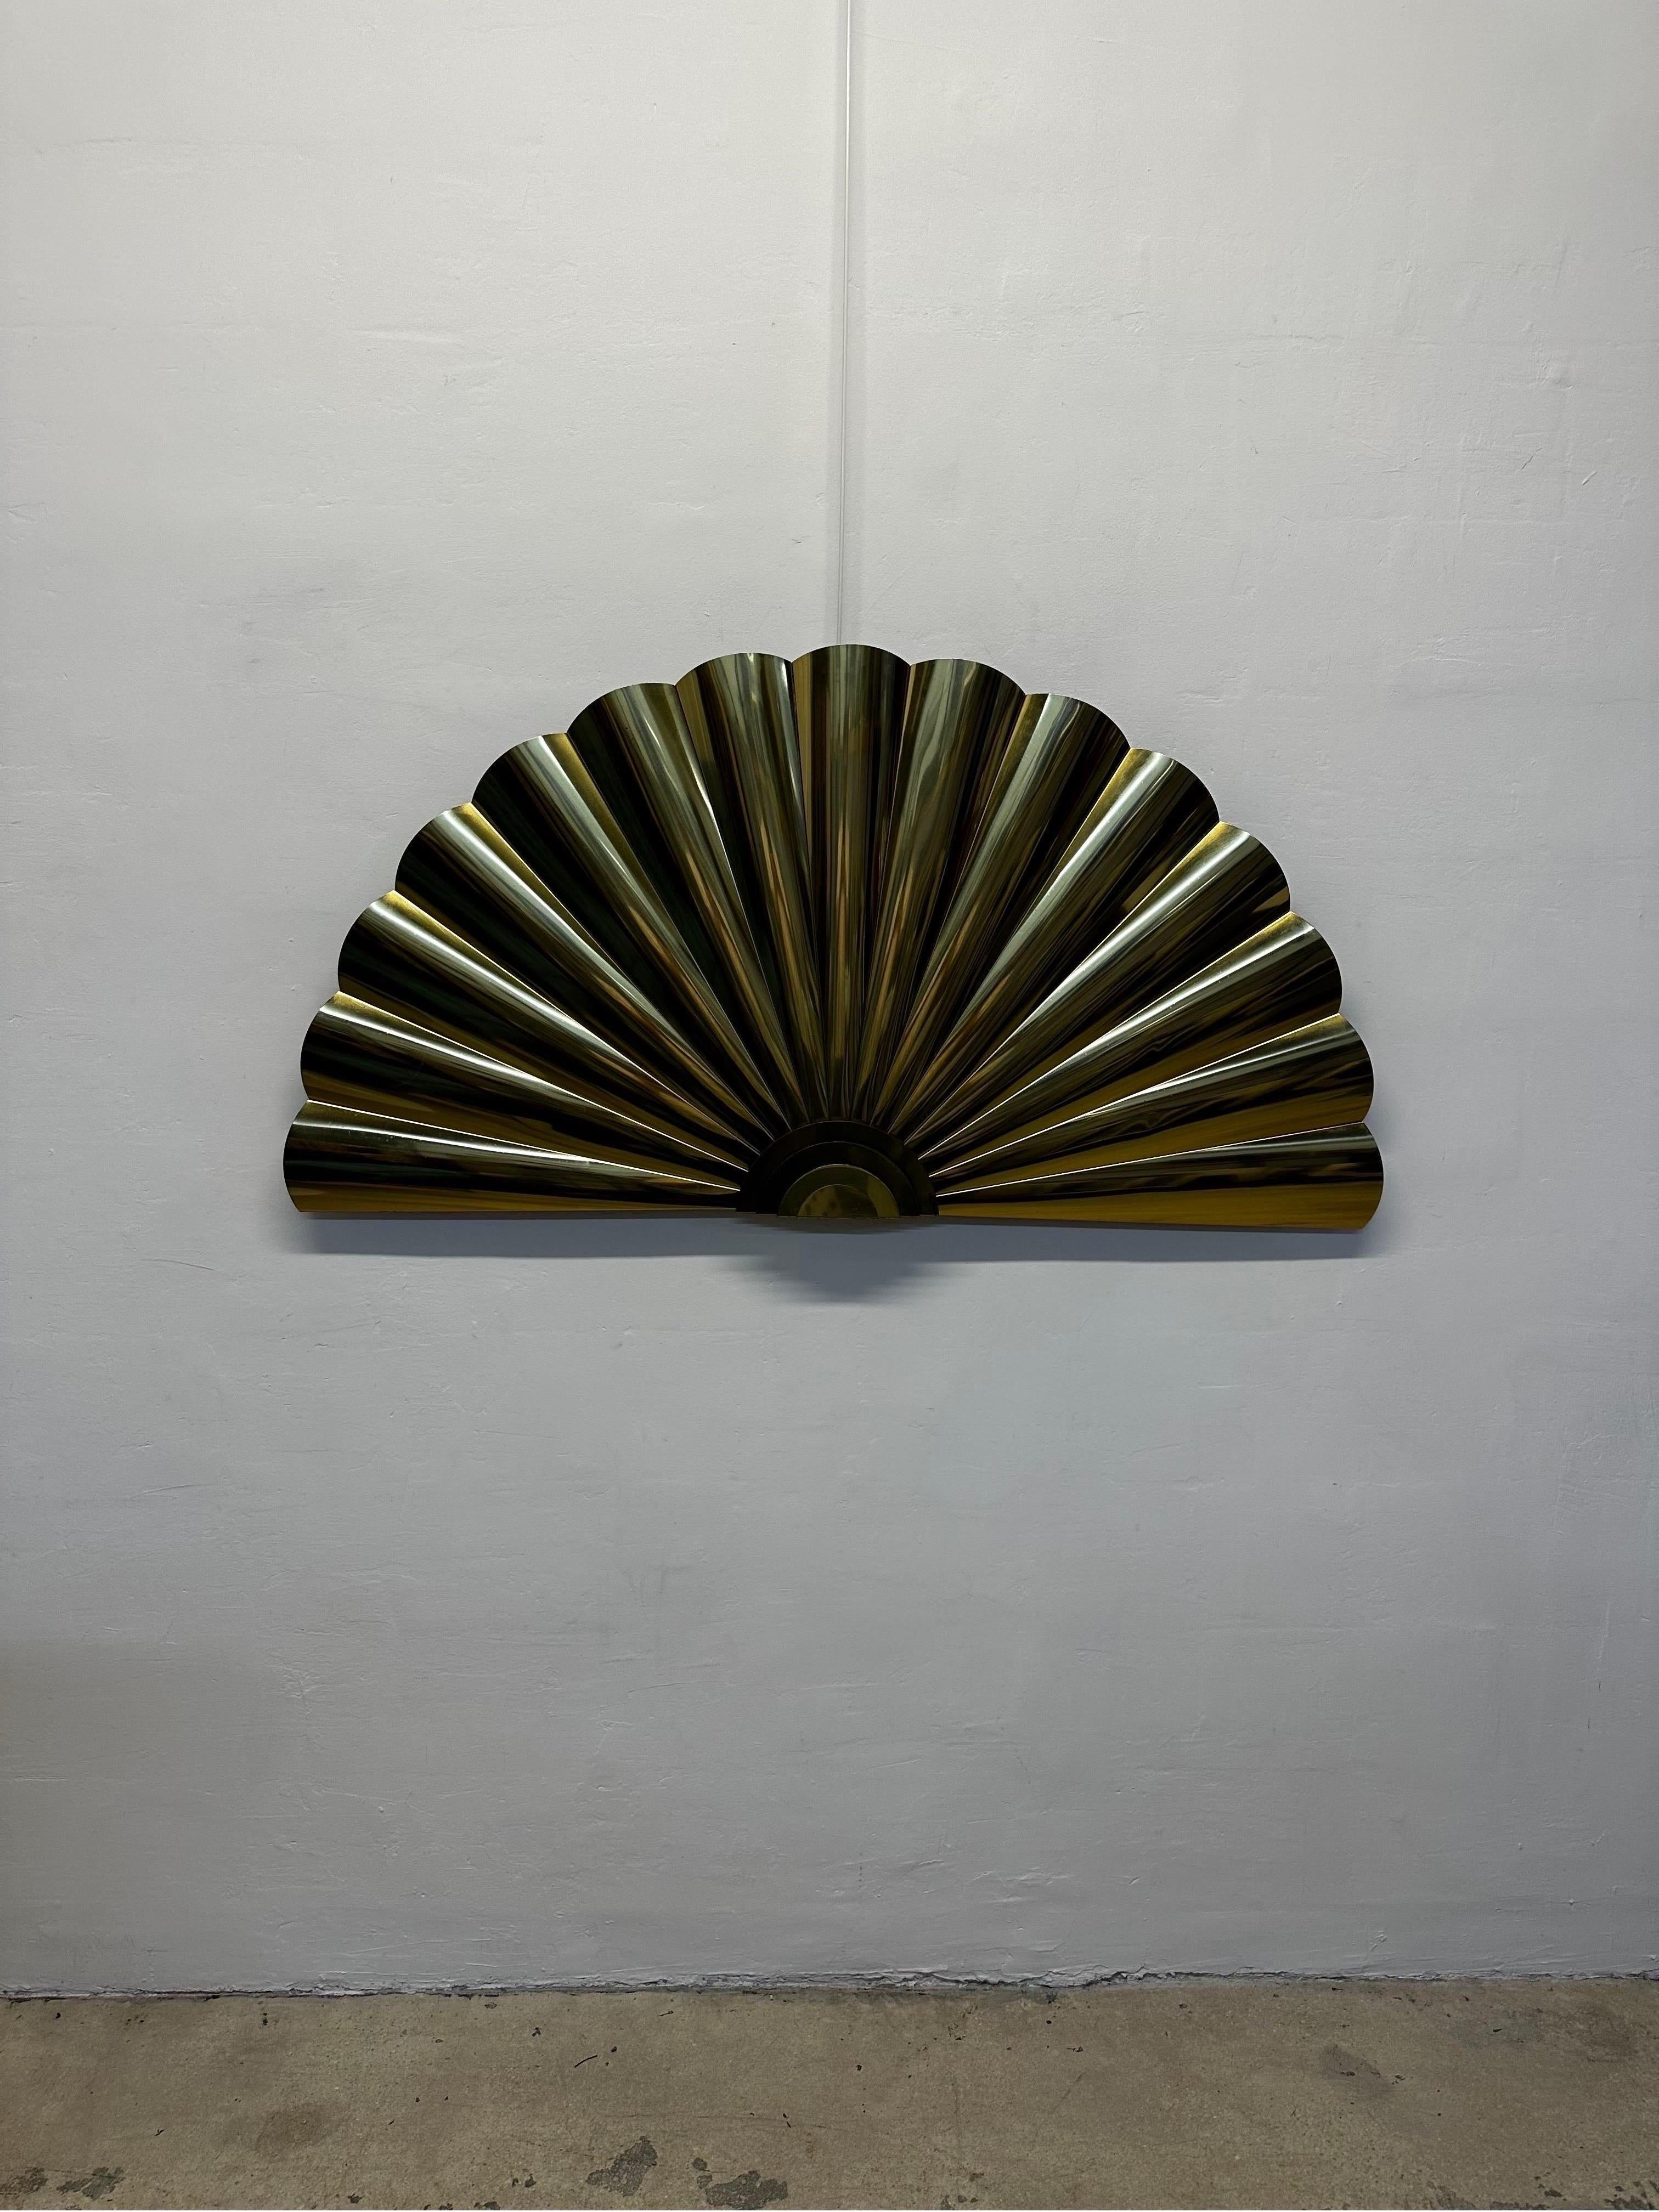 Large brass wall sculpture in the form of a fan or shell by C. Jere Artisan House.  Signed and dates 1989.